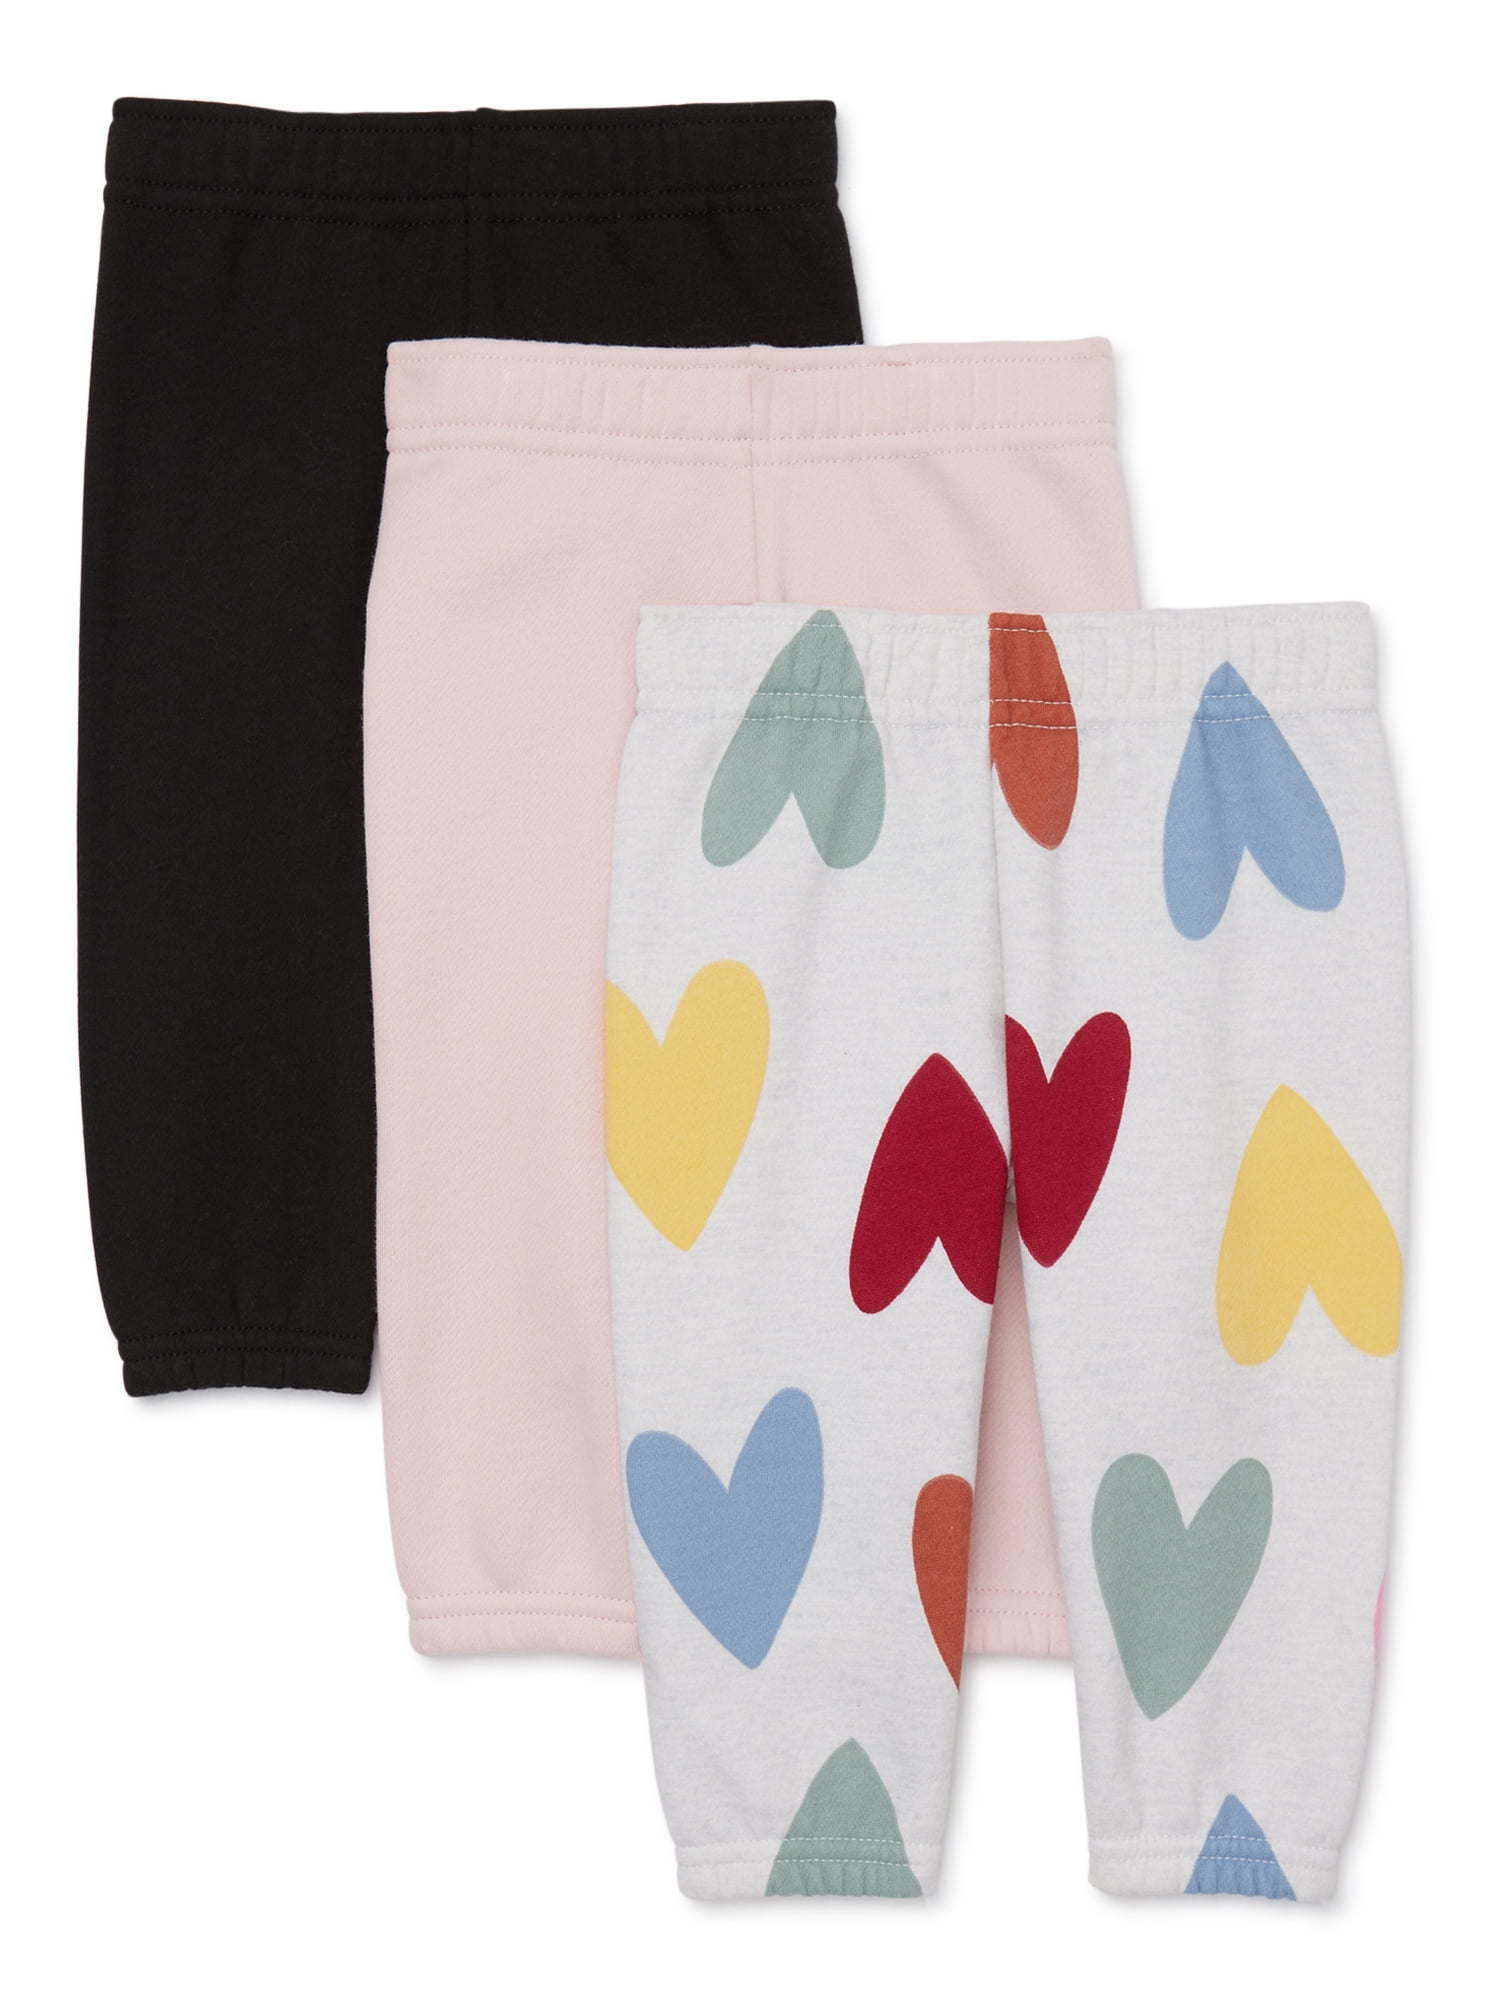 Garanimals Baby & Toddler Clothing: 3-Count Baby Girl's Fleece Jogger Pants (Various) $6.74 ($2.22 Each) & More $6.74  + Free S&H w/ Walmart+ or $35+